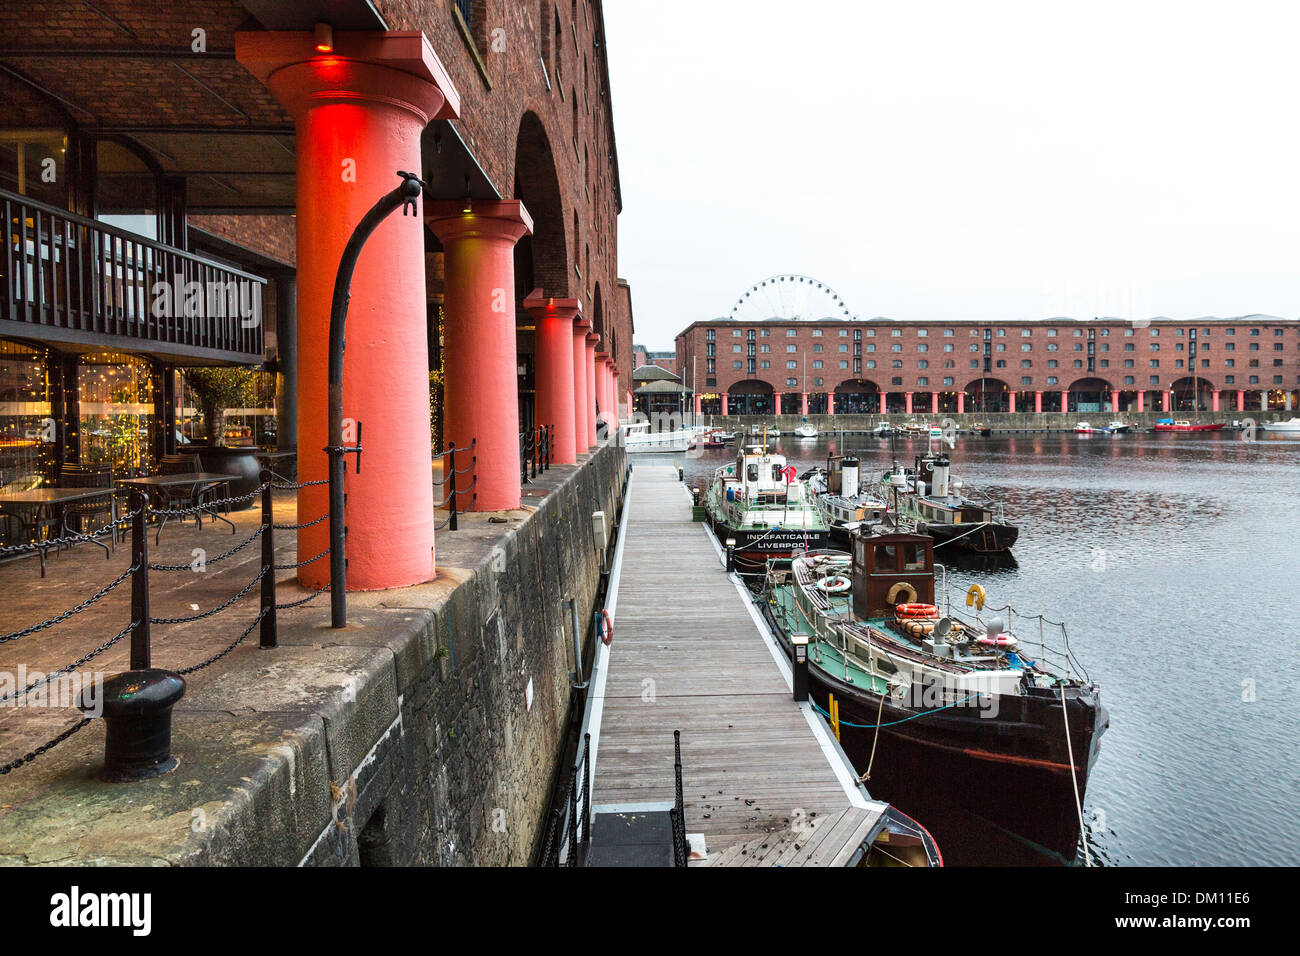 Boats and barges moored at the Albert Dock, Liverpool, UK Stock Photo